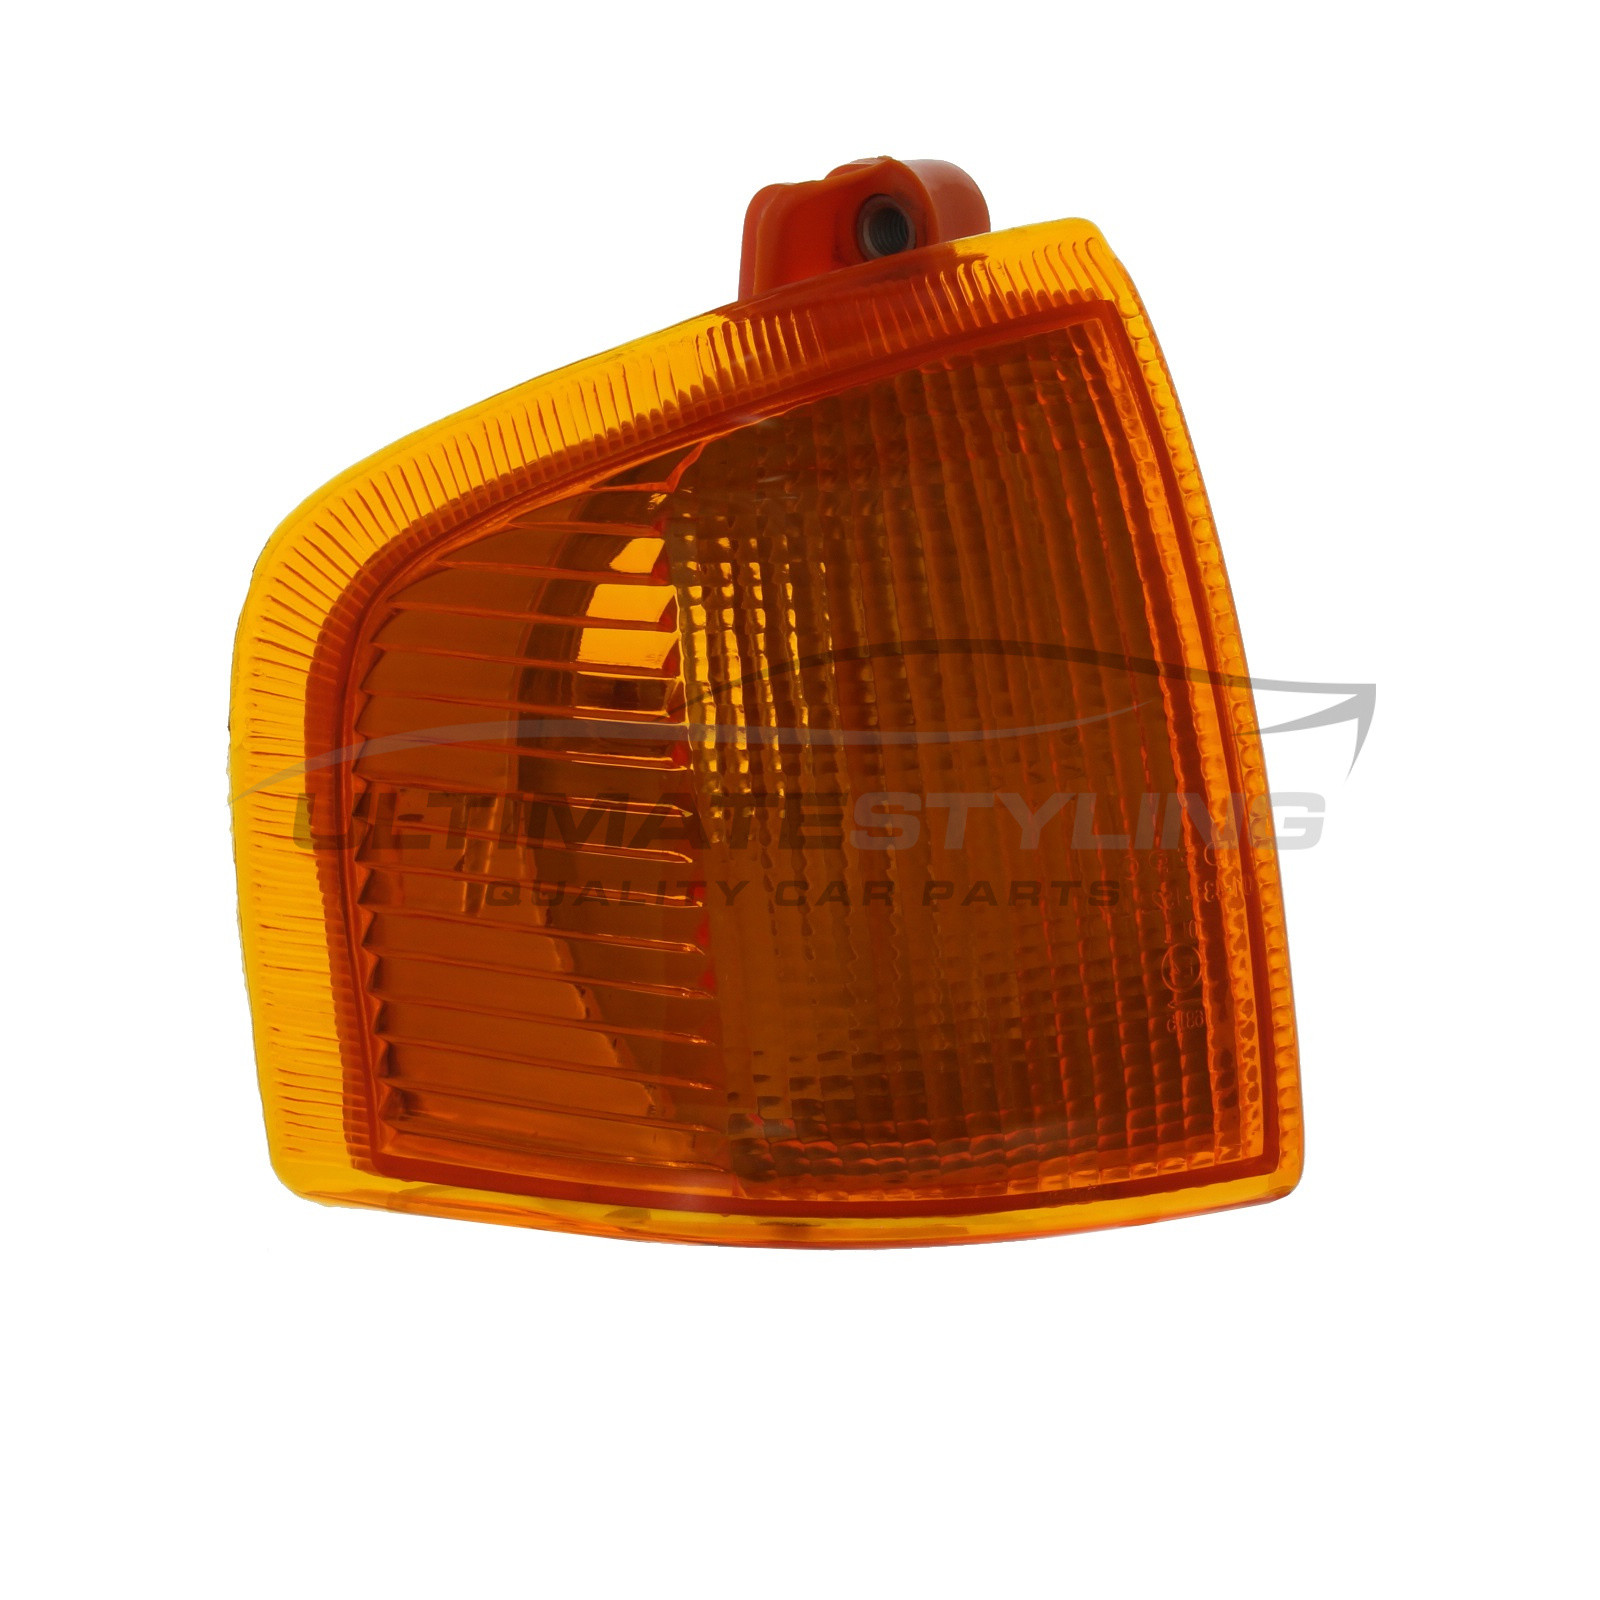 Ford Escort 1986-1991 / Ford Orion 1986-1990 Amber Front Indicator Excludes Bulb Holder - Drivers Side (RH)